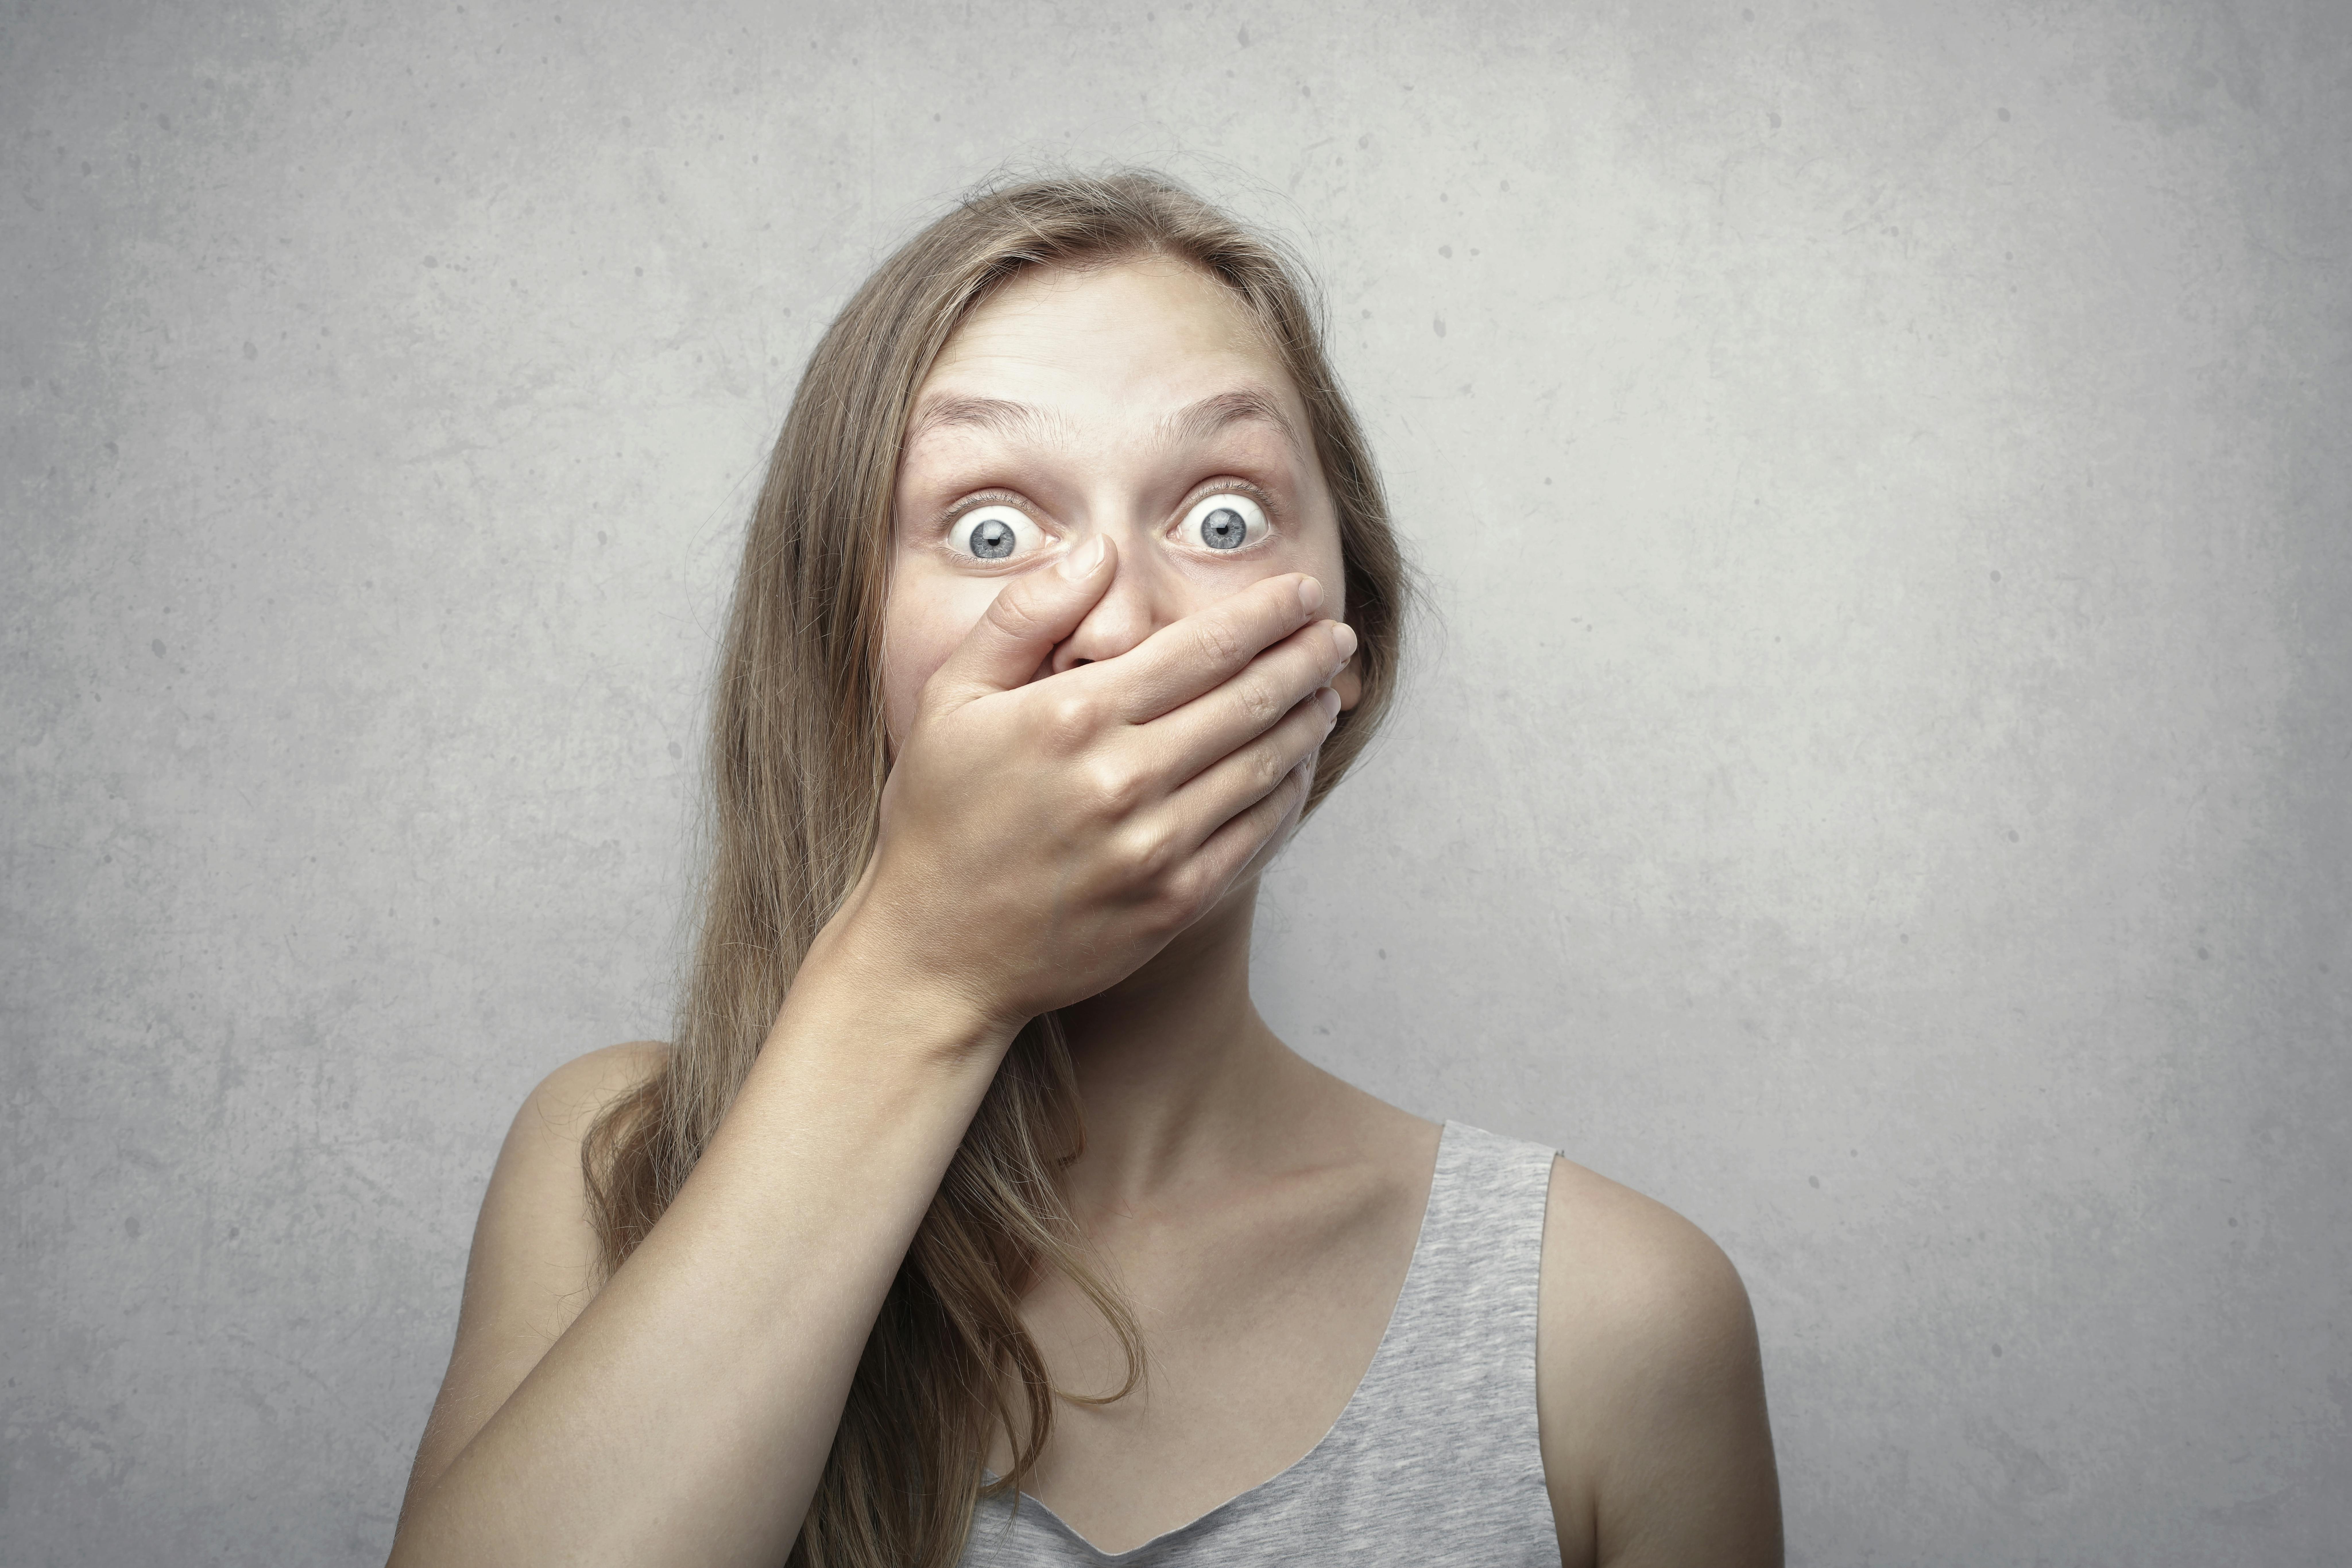 Shocked woman with her hand over her mouth | Source: Pexels